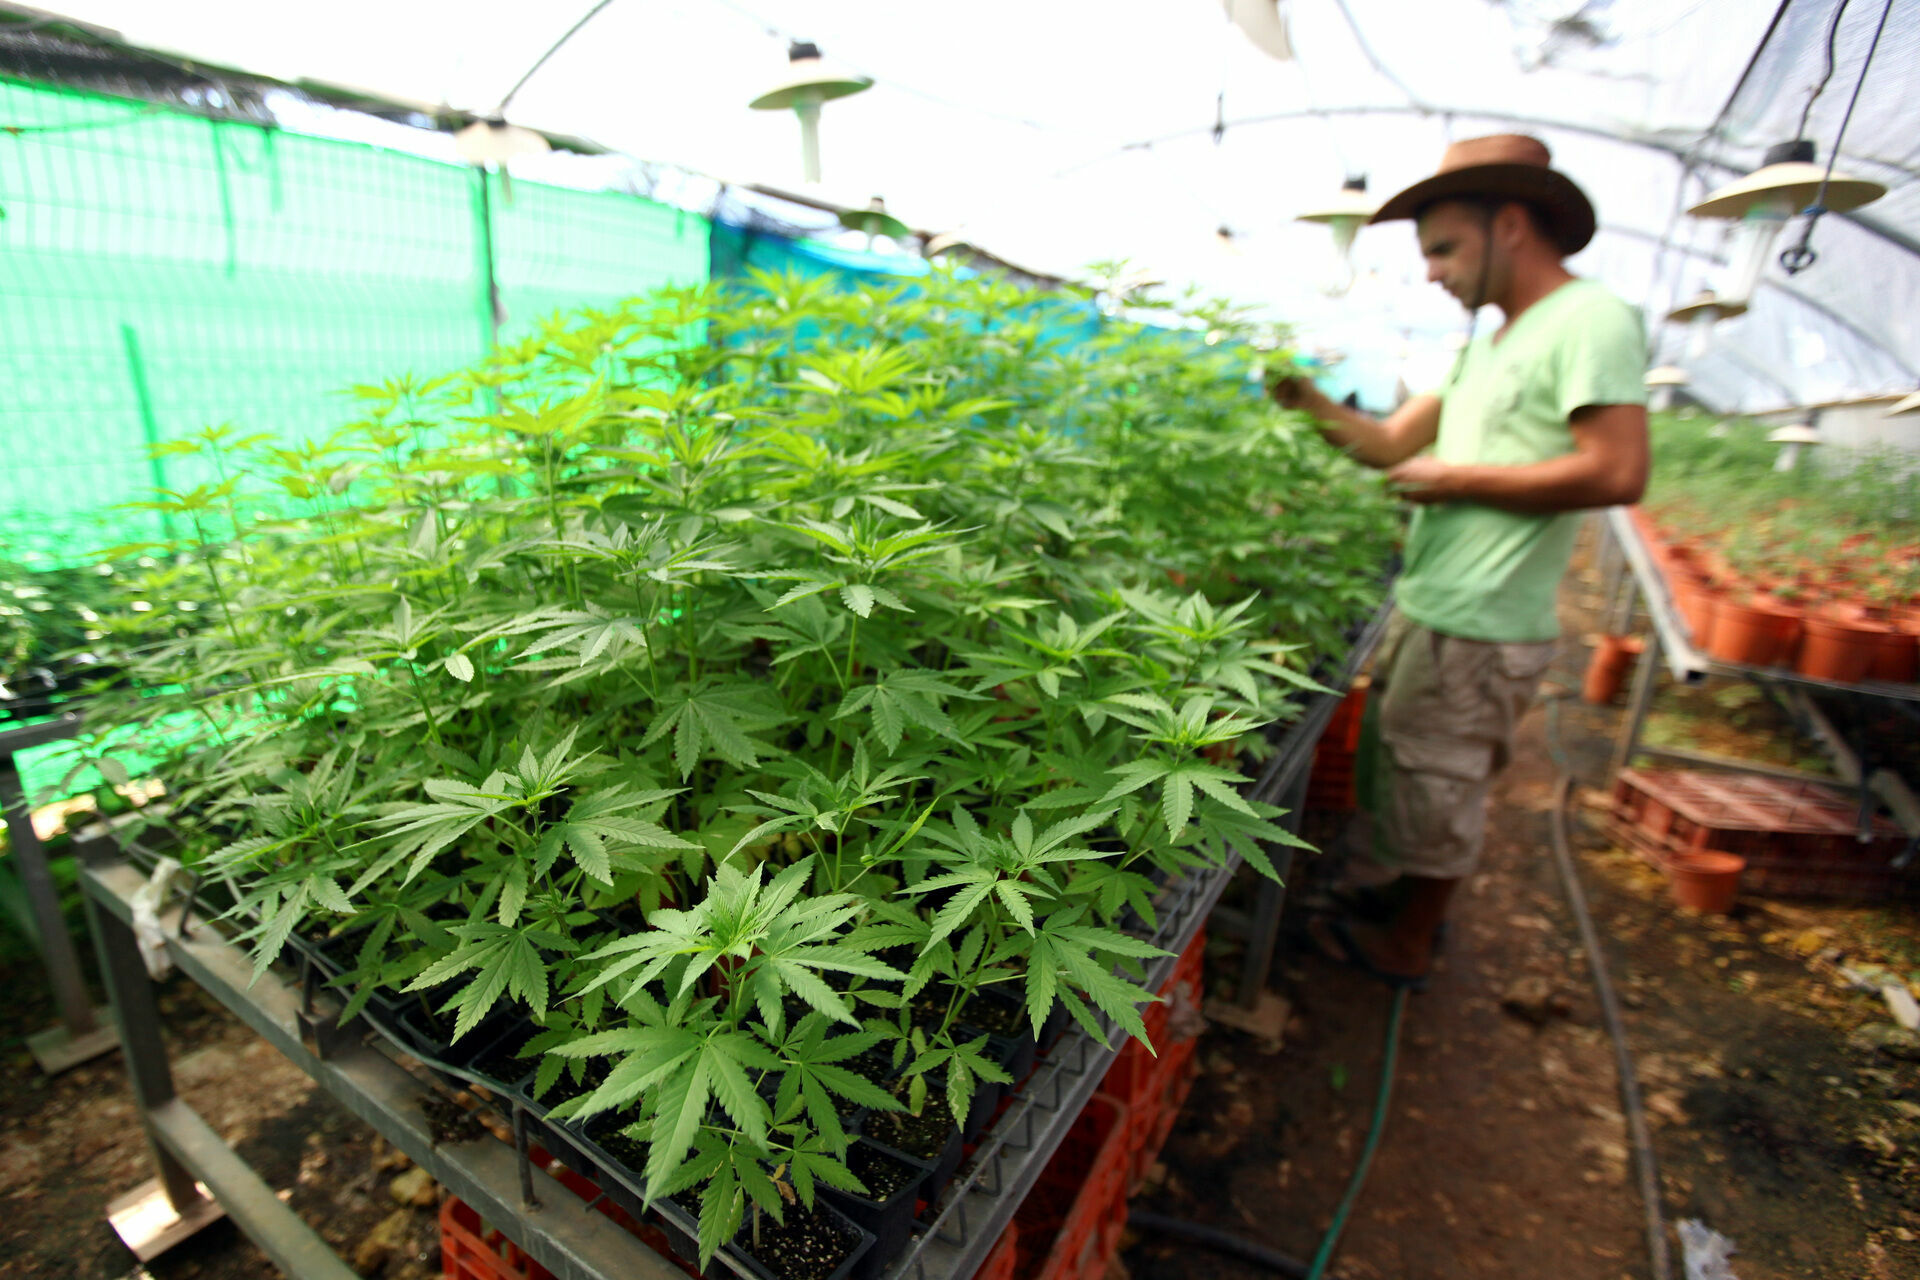 Thailand is the first in Asia to legalize the cultivation and consumption of marijuana